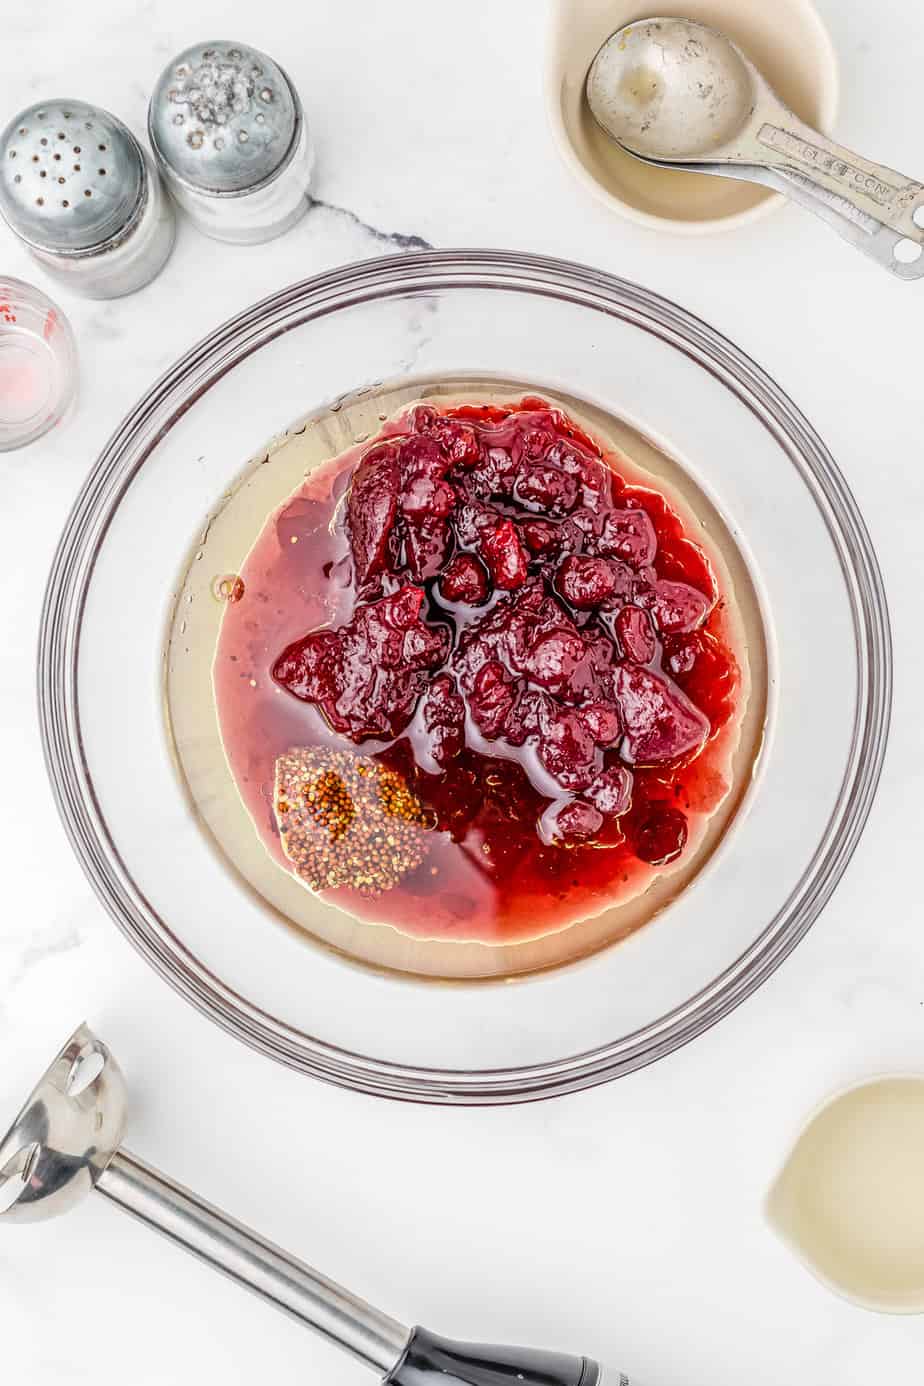 Cranberry sauce, oil, mustard and maple syrup in a bowl on a counter from overhead with an immersion blender, measuring cups and salt and pepper also on the counter.